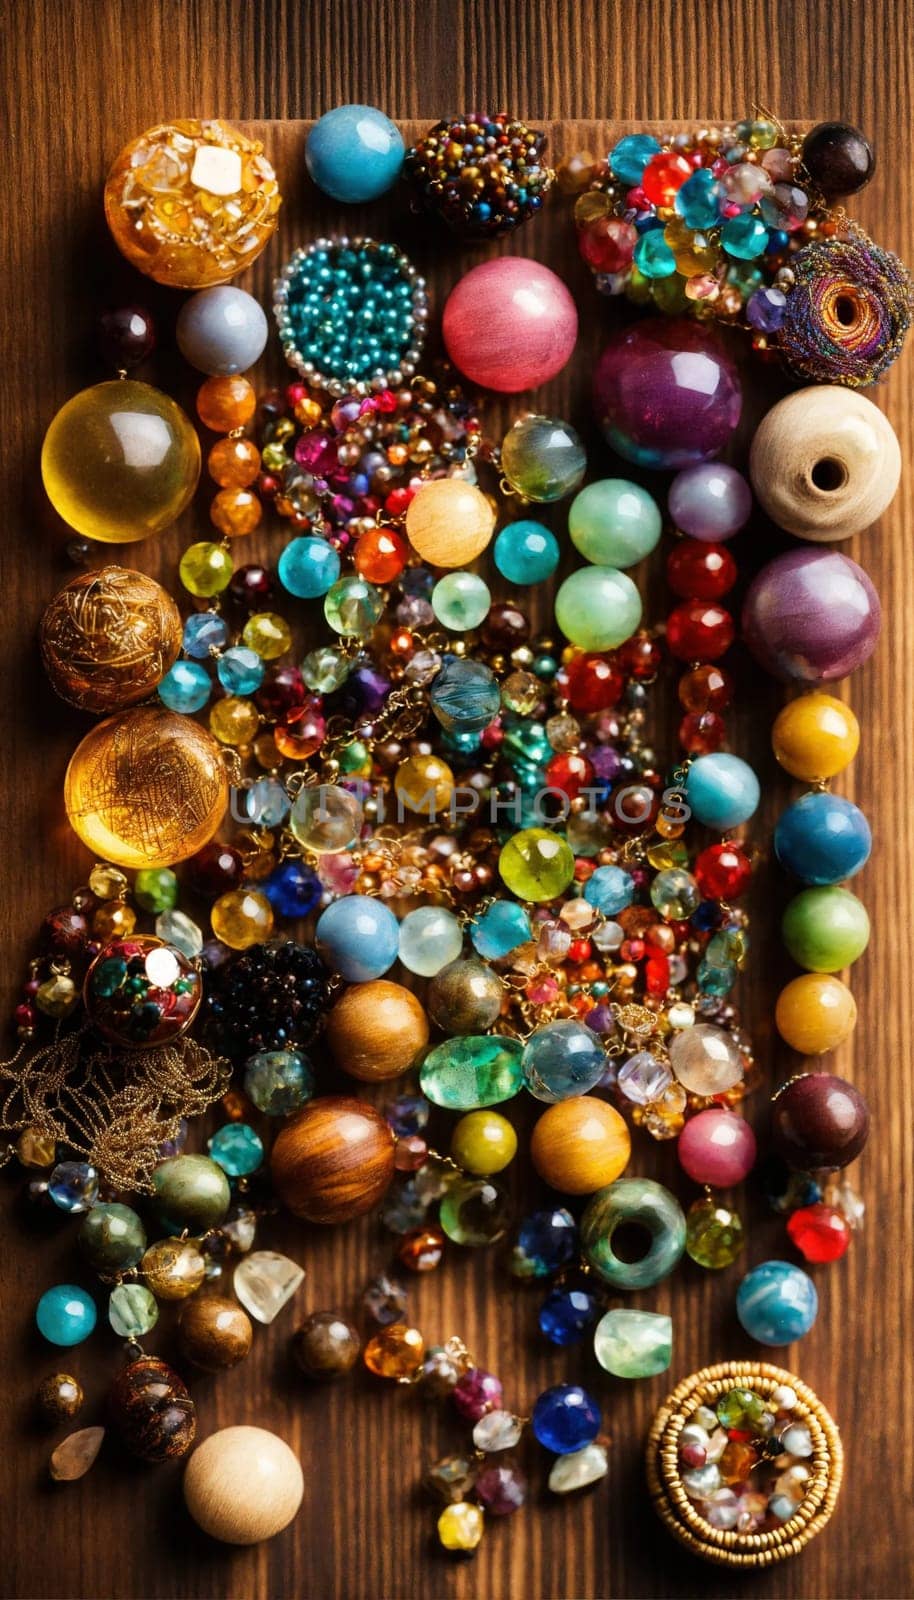 beads for needlework. Selective focus. by mila1784